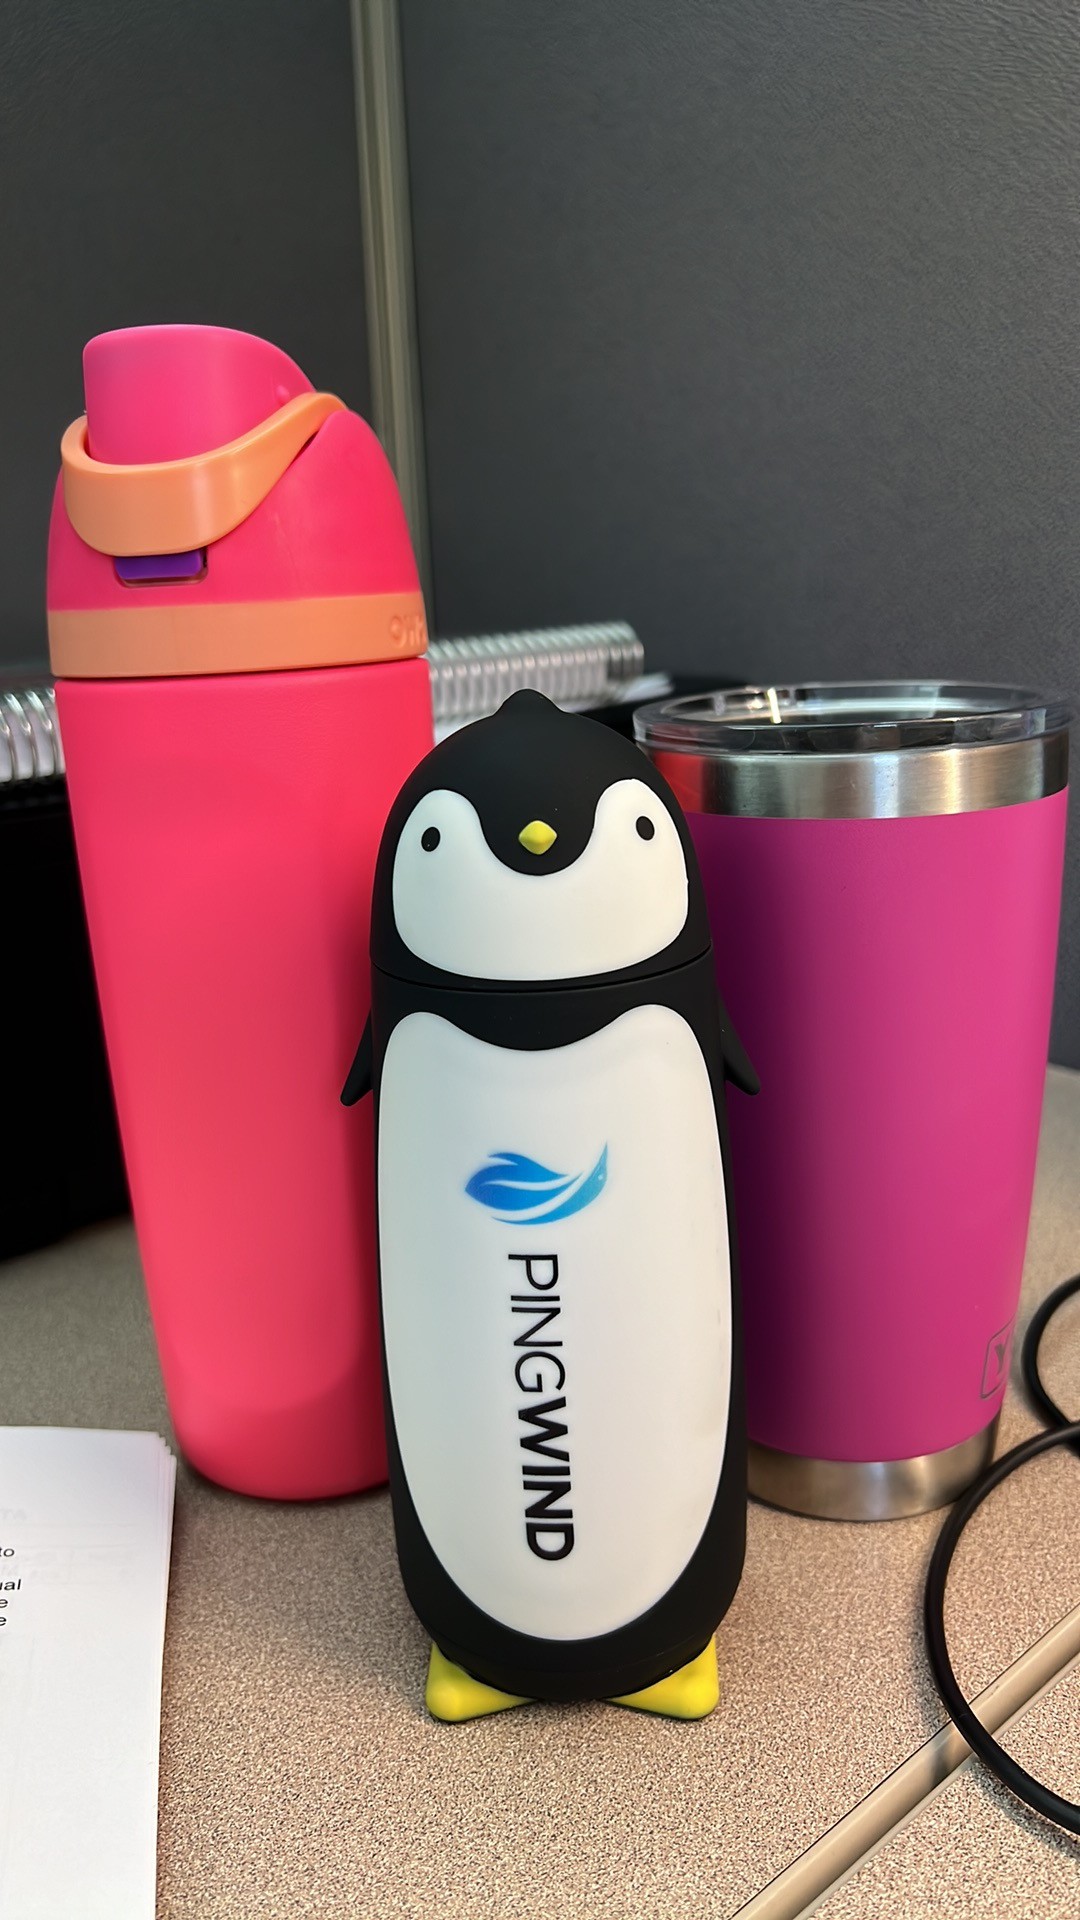 PingWind's mascot, the penguin.